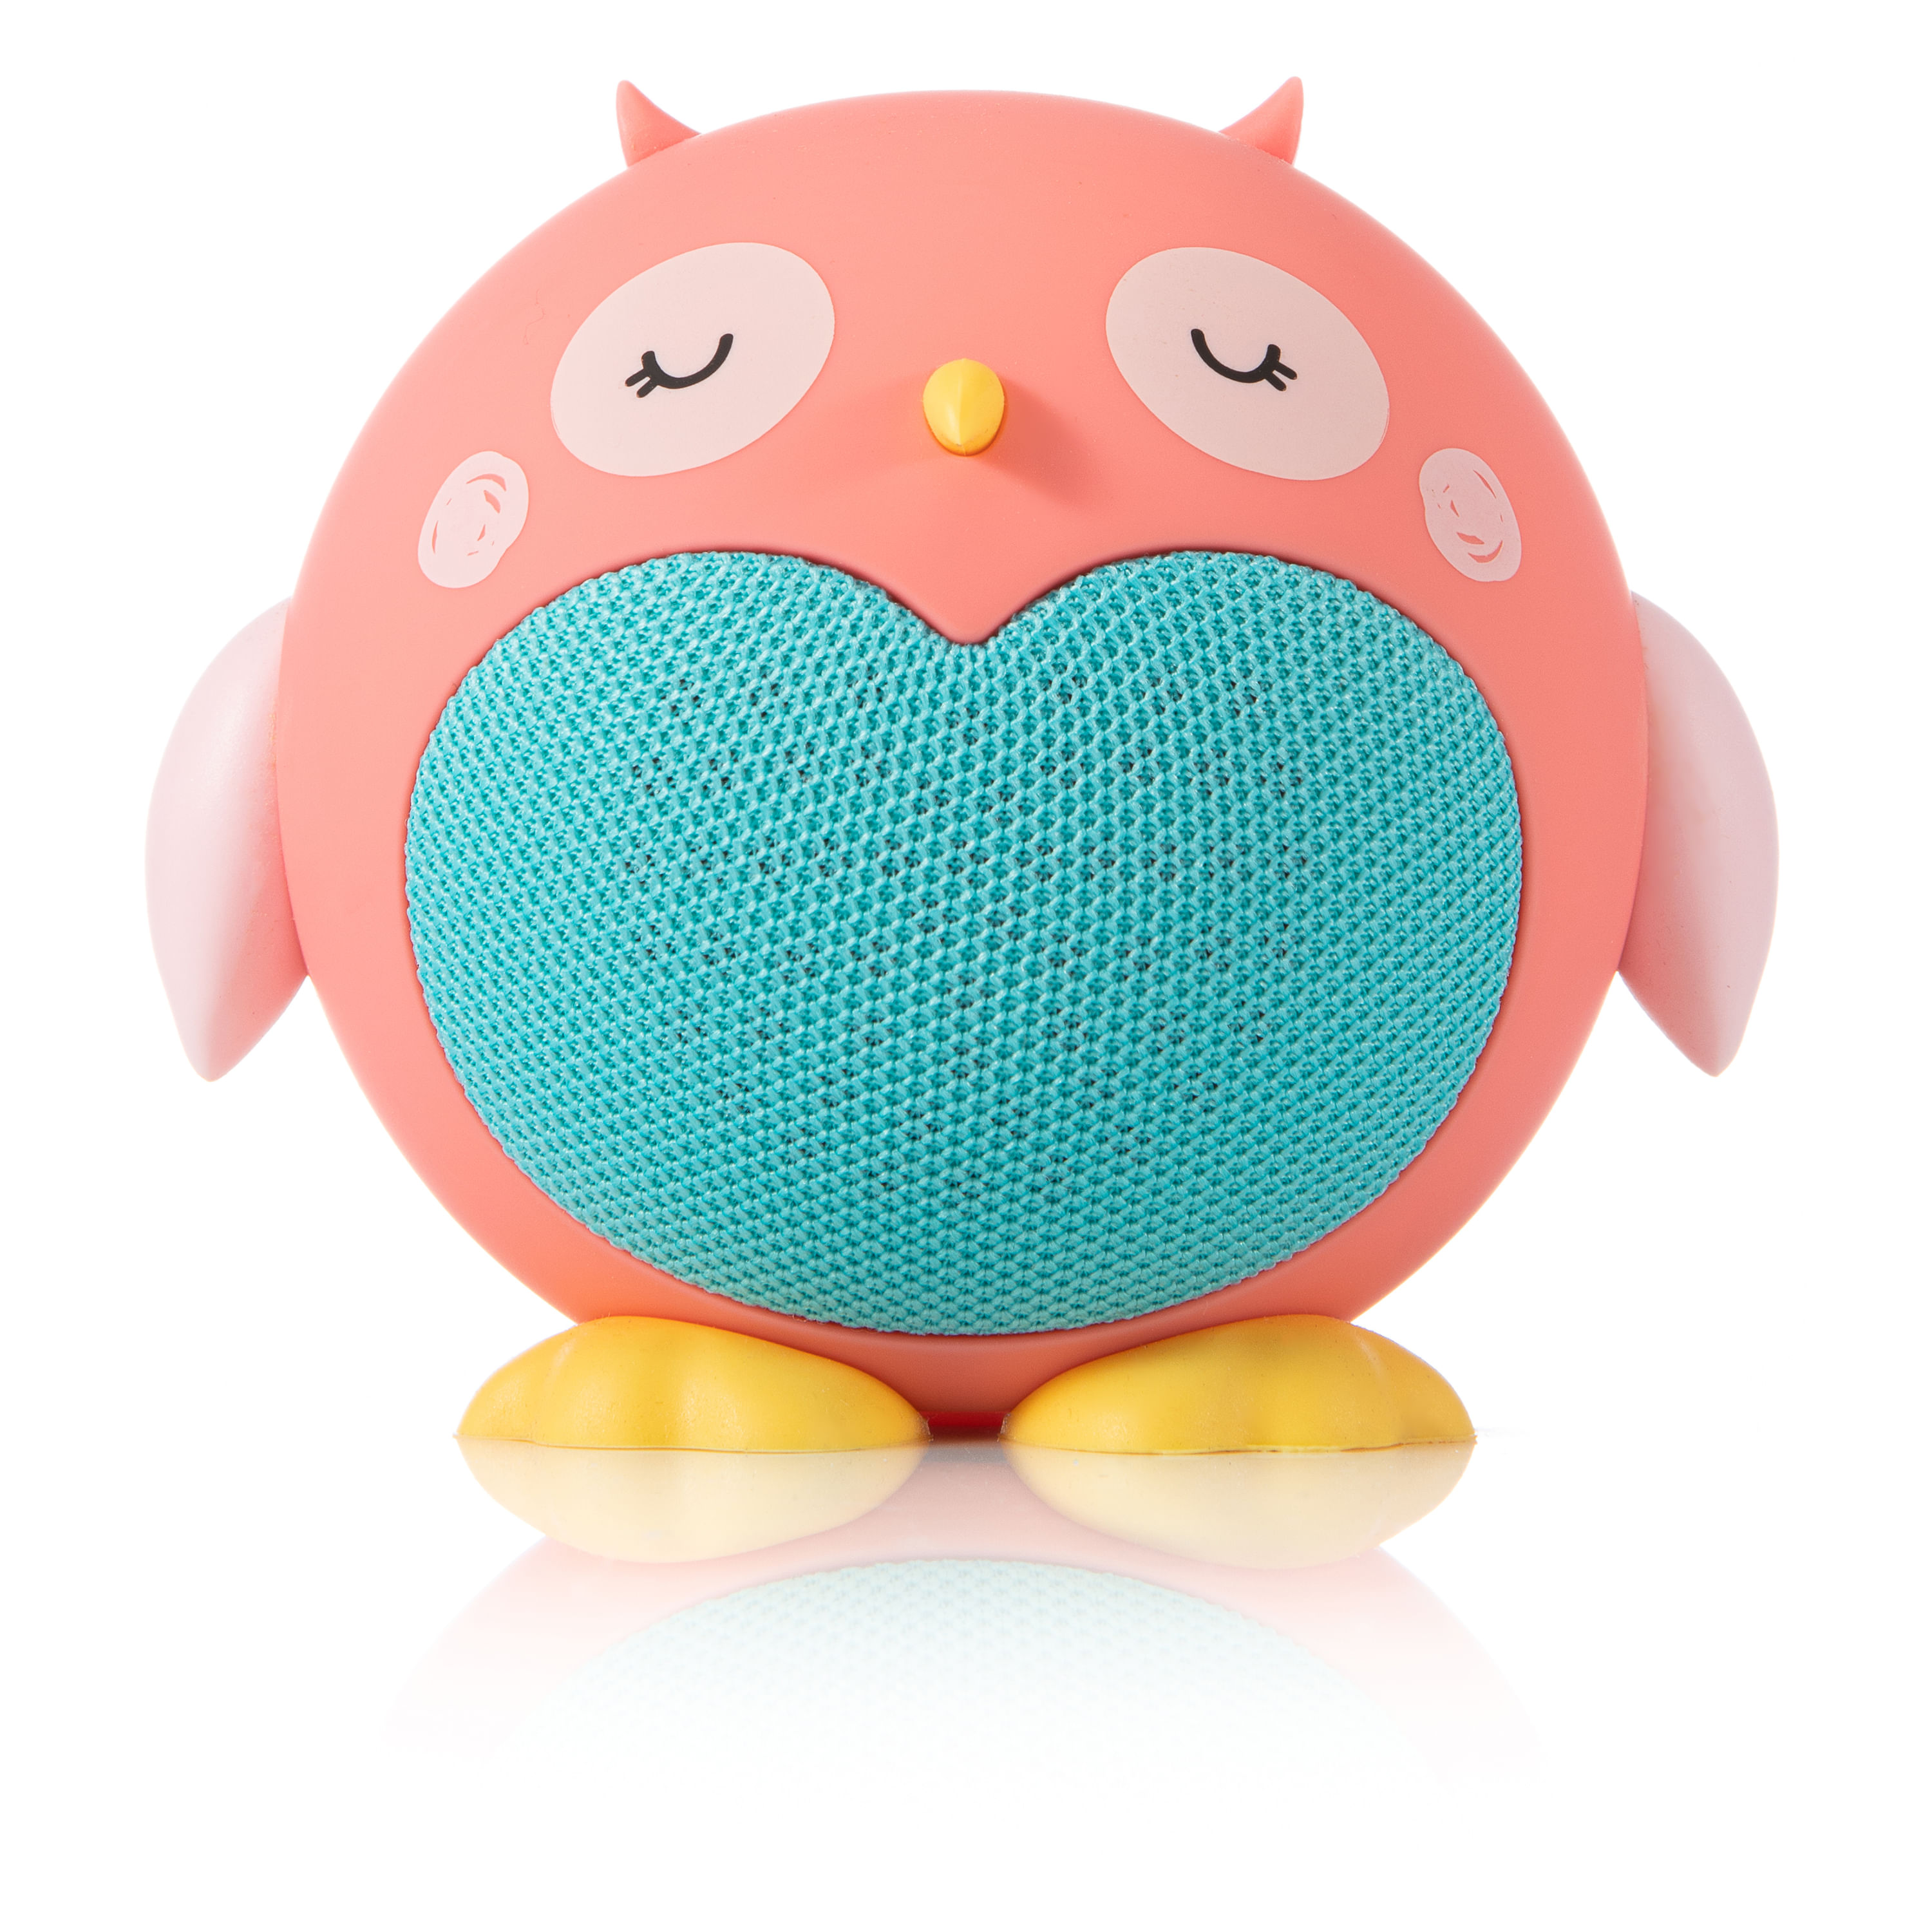 Parlante-Inal-mbrico-Planet-Buddies-Bluetooth-1-103279